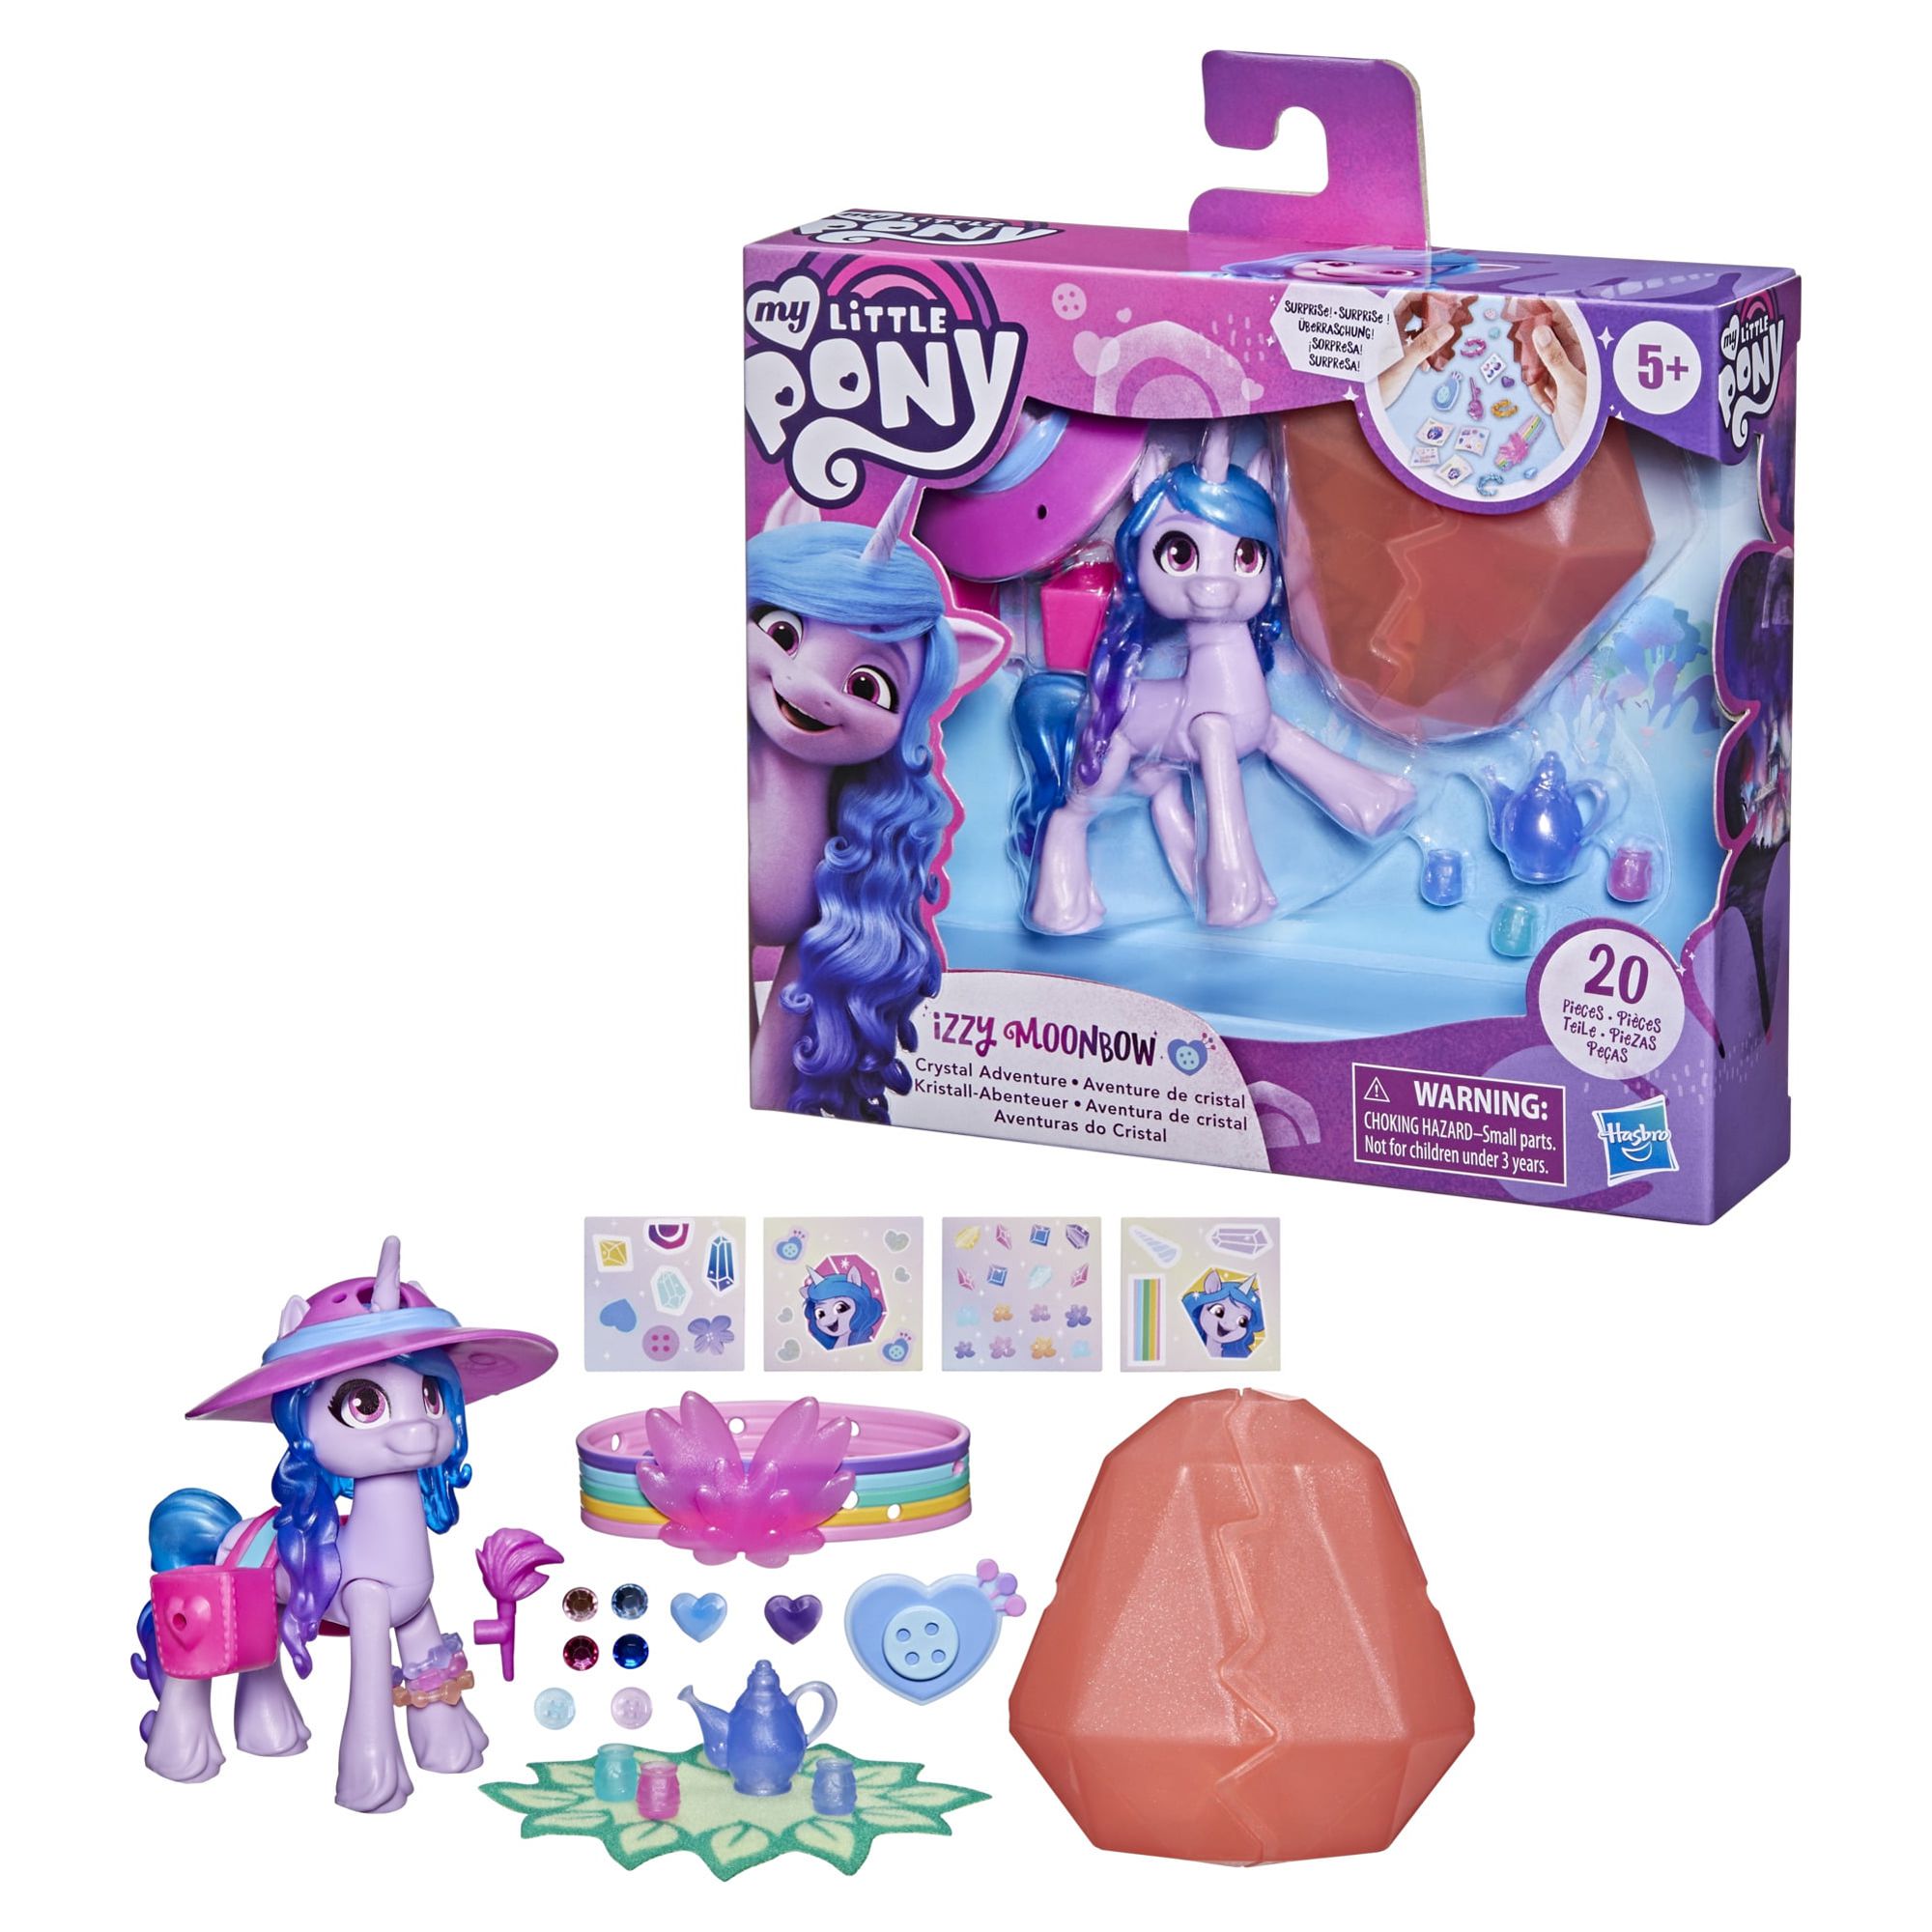 My Little Pony: A New Generation&nbsp;Movie Crystal Adventure Izzy Moonbow - image 1 of 9